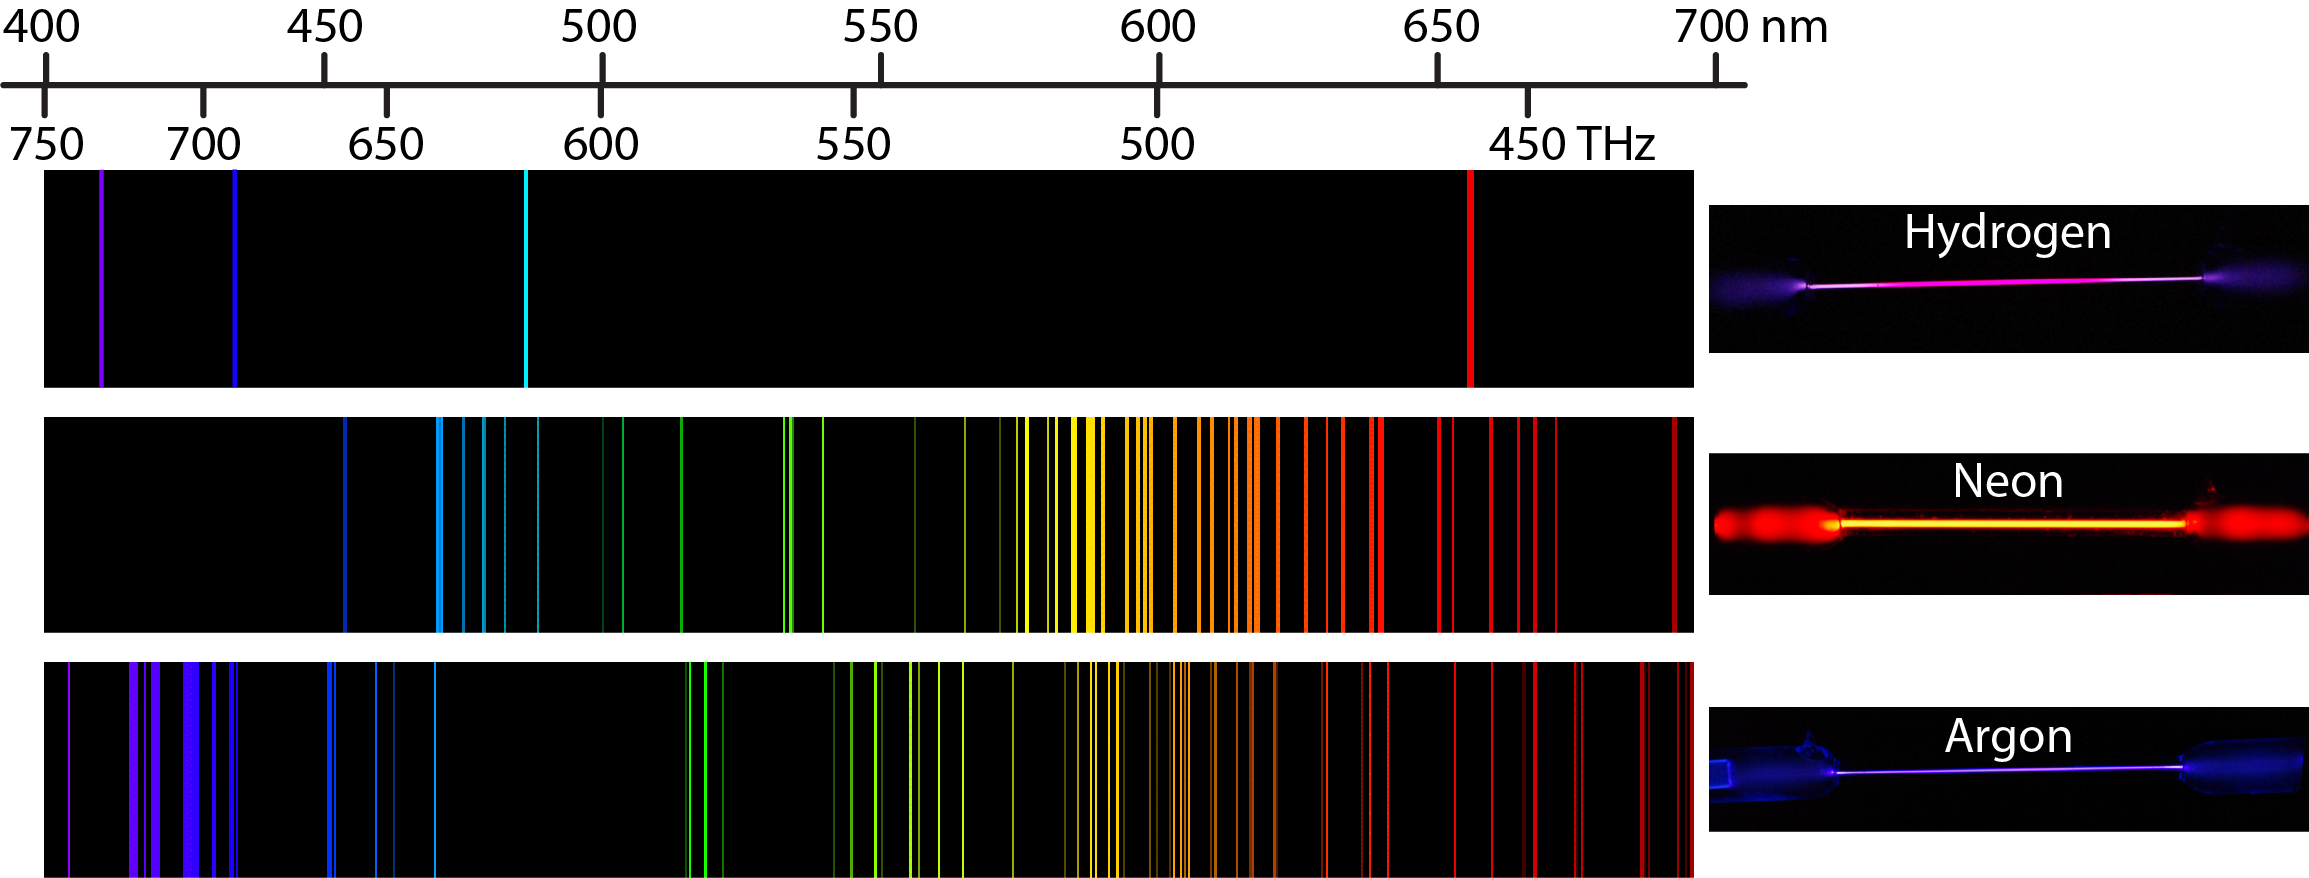 An image is shown with 3 rows. Across the top is a scale that begins at 400nm at the left and extends to 700nm to the right. The top row shows the emission spectrum for hydrogen. This spectrum shows single bands in the violet, indigo, blue, and orange regions. There is a hydrogen discharge lamp on the right showing the overall purple color. The second row shows the emission spectrum for neon. This spectrum shows many band in the visible spectrum, from blue to red, with a greater concentration of bands in the red and orange region. There is a neon discharge lamp on the right showing the overall orange color. The third row shows the emission spectrum for argon. This spectrum shows many bands in the visible spectrum, from indigo to red, with a greater concentration of bands in the blue and indigo region. There is an argon discharge lamp on the right showing the overall violet color. It is important to note that each of the color bands for the emission spectra of the elements matches to a specific wavelength of light. Extending a vertical line from the bands to the scale above or below the diagram will match the band to a specific measurement on the scale.